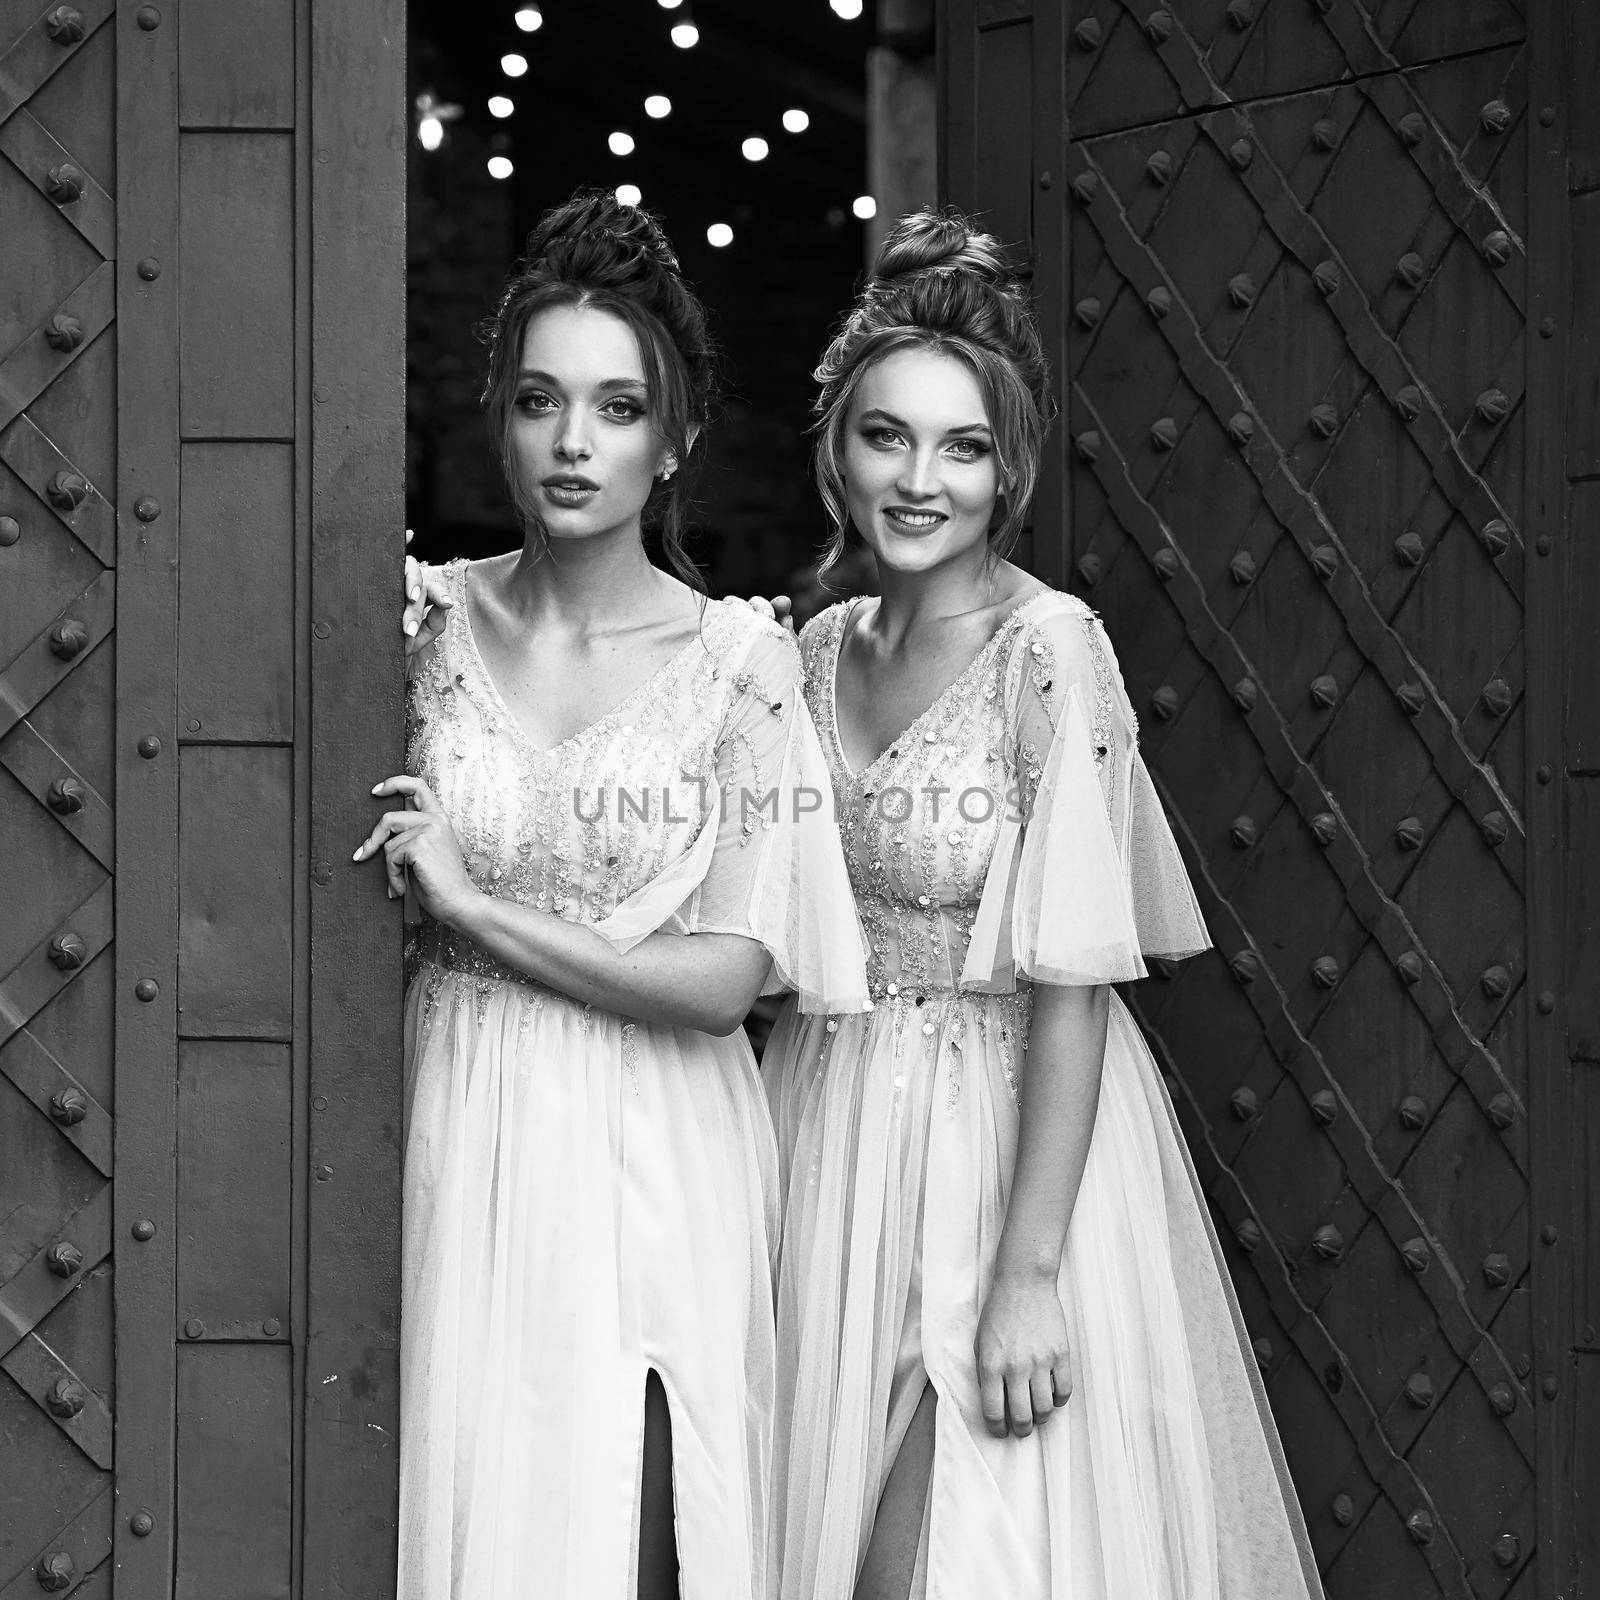 Beautiful bridesmaids in gorgeous light silver dresses in old beautiful European city on a wedding day in summer. Dresses are floor length or full-lenghth long tulle with half sheer sleeves and side slit.